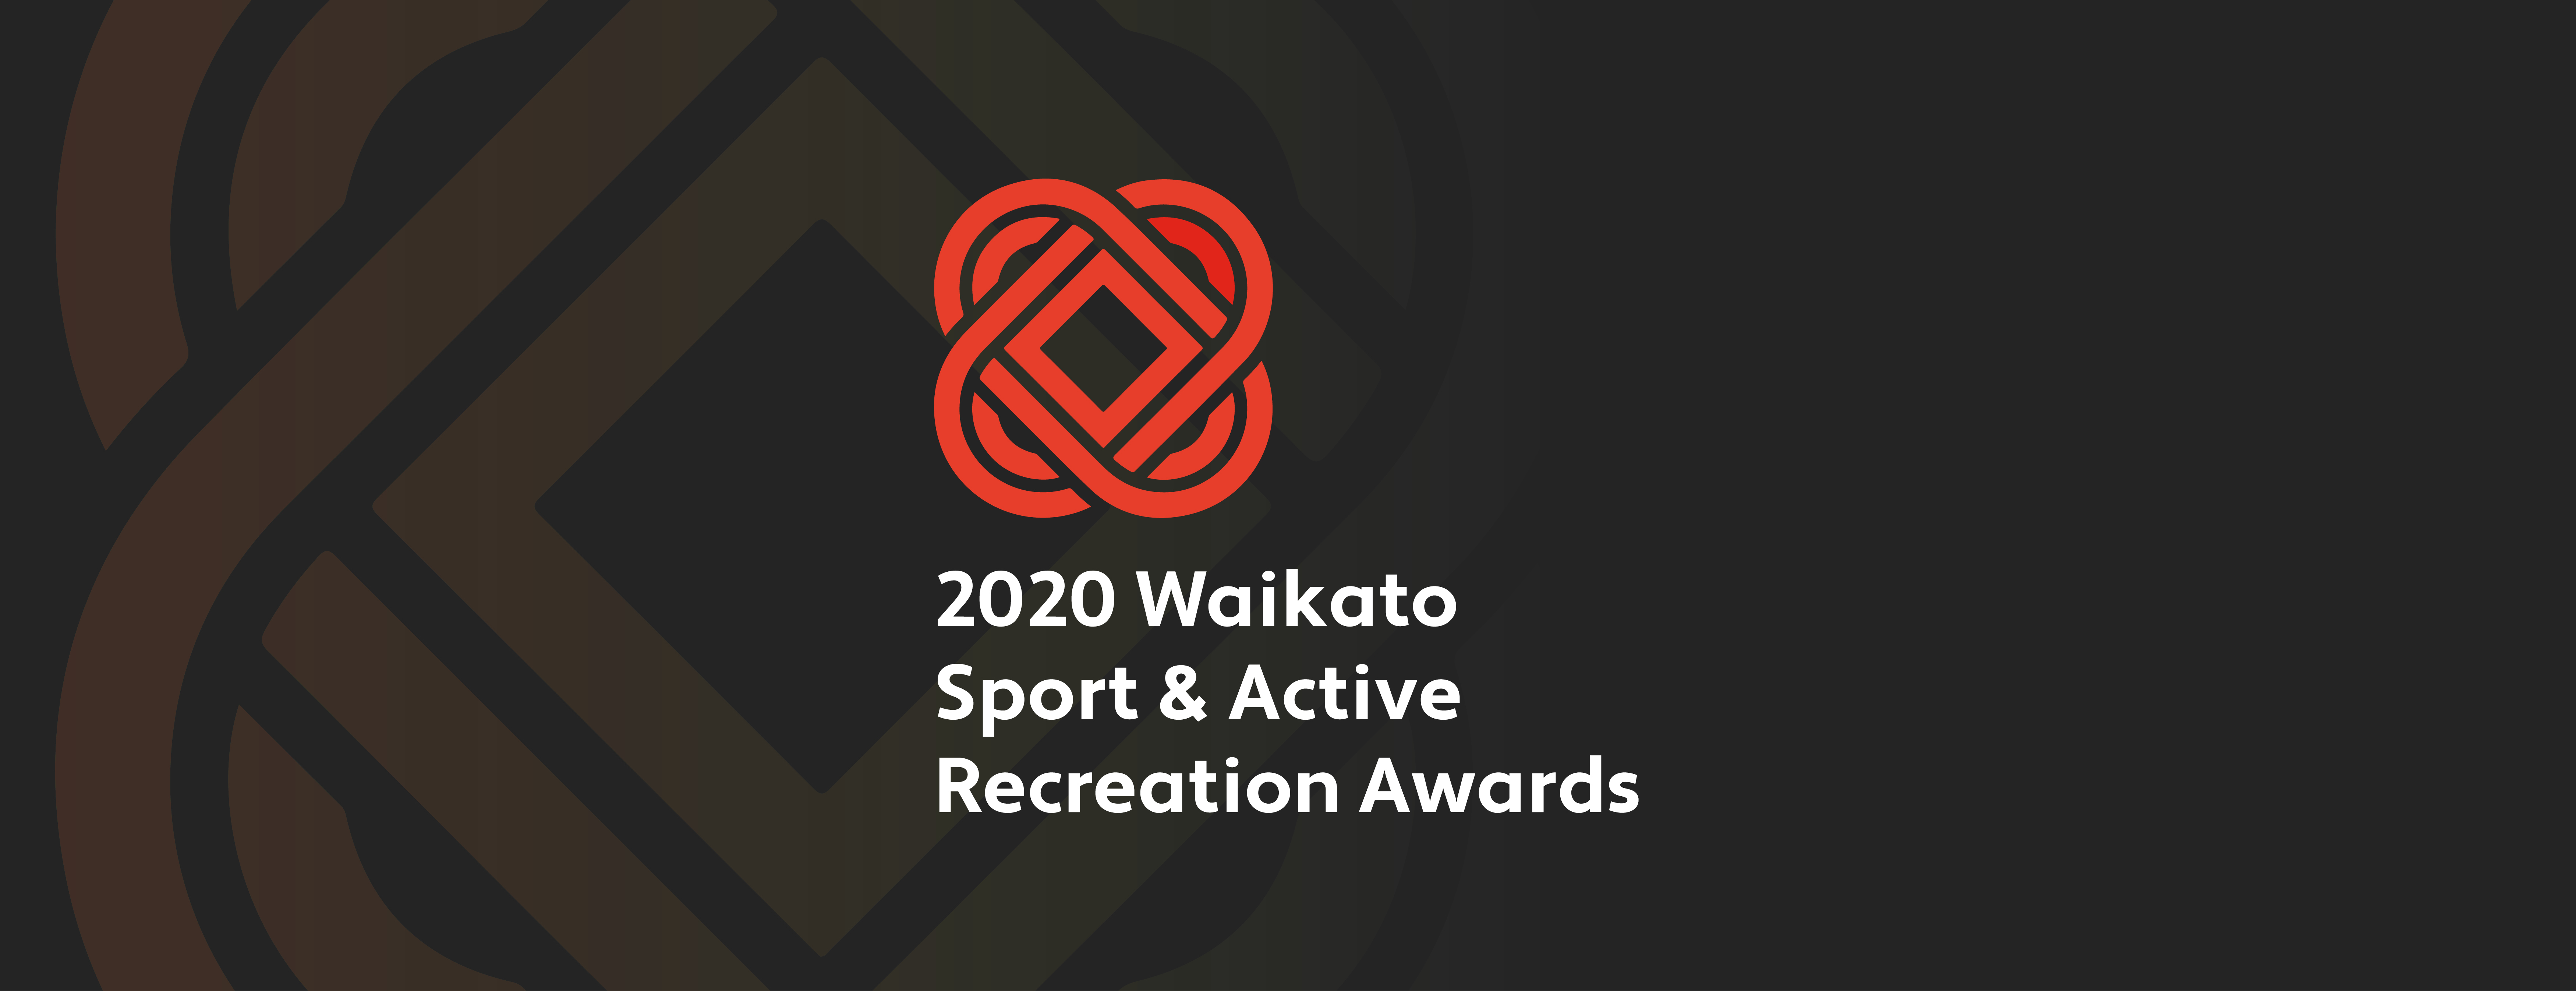 Sport Waikato awards changing for 2020 